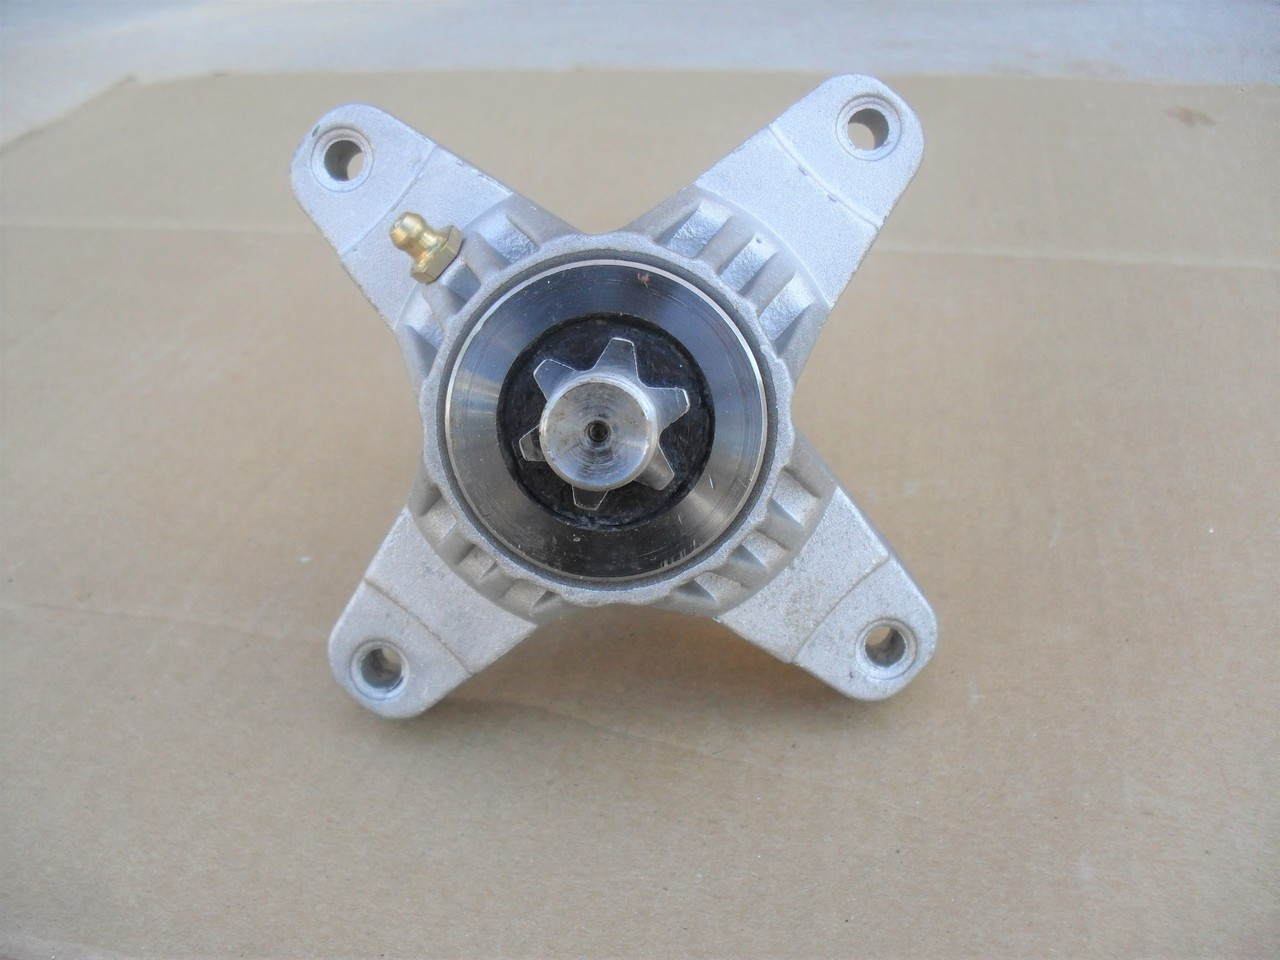 Deck Spindle for Cub Cadet LT1040, LT1042 and RZT, 618-0624, 618-0659, 918-0624, 918-0624A, 918-0624B, 918-0659, 918-0659A